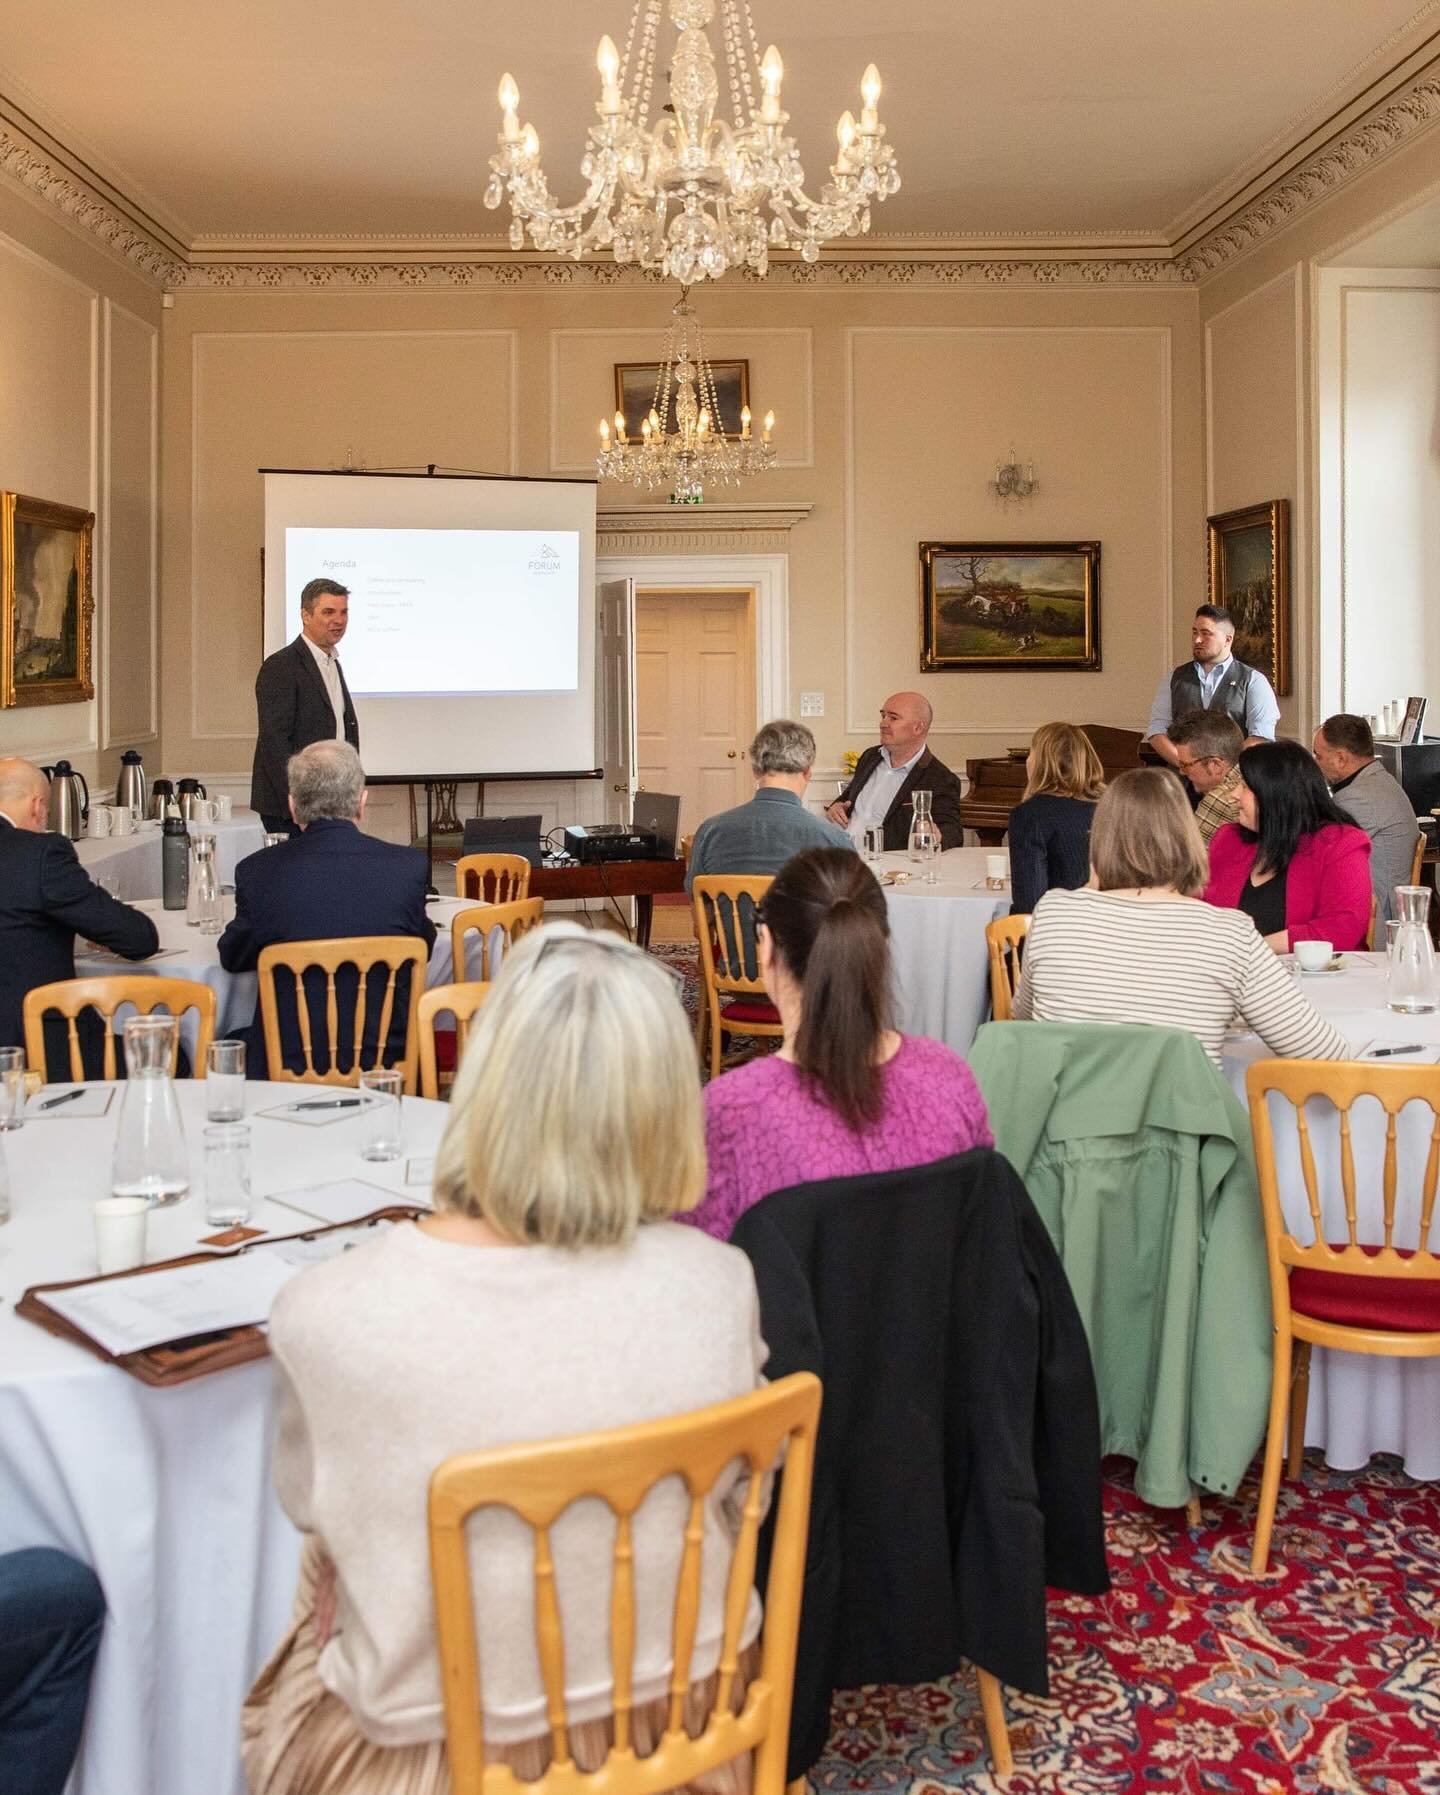 CORPORATE EVENTS at @goldsboroughhall ⭐️

Book your next:

⭐️ Conference 
⭐️ Meeting 
⭐️ Exhibition 
⭐️ Private Dinner 
⭐️ Team Building Day
⭐️ Networking events 

All in the elegant setting of this 16th Century Stately Home and its award winning his